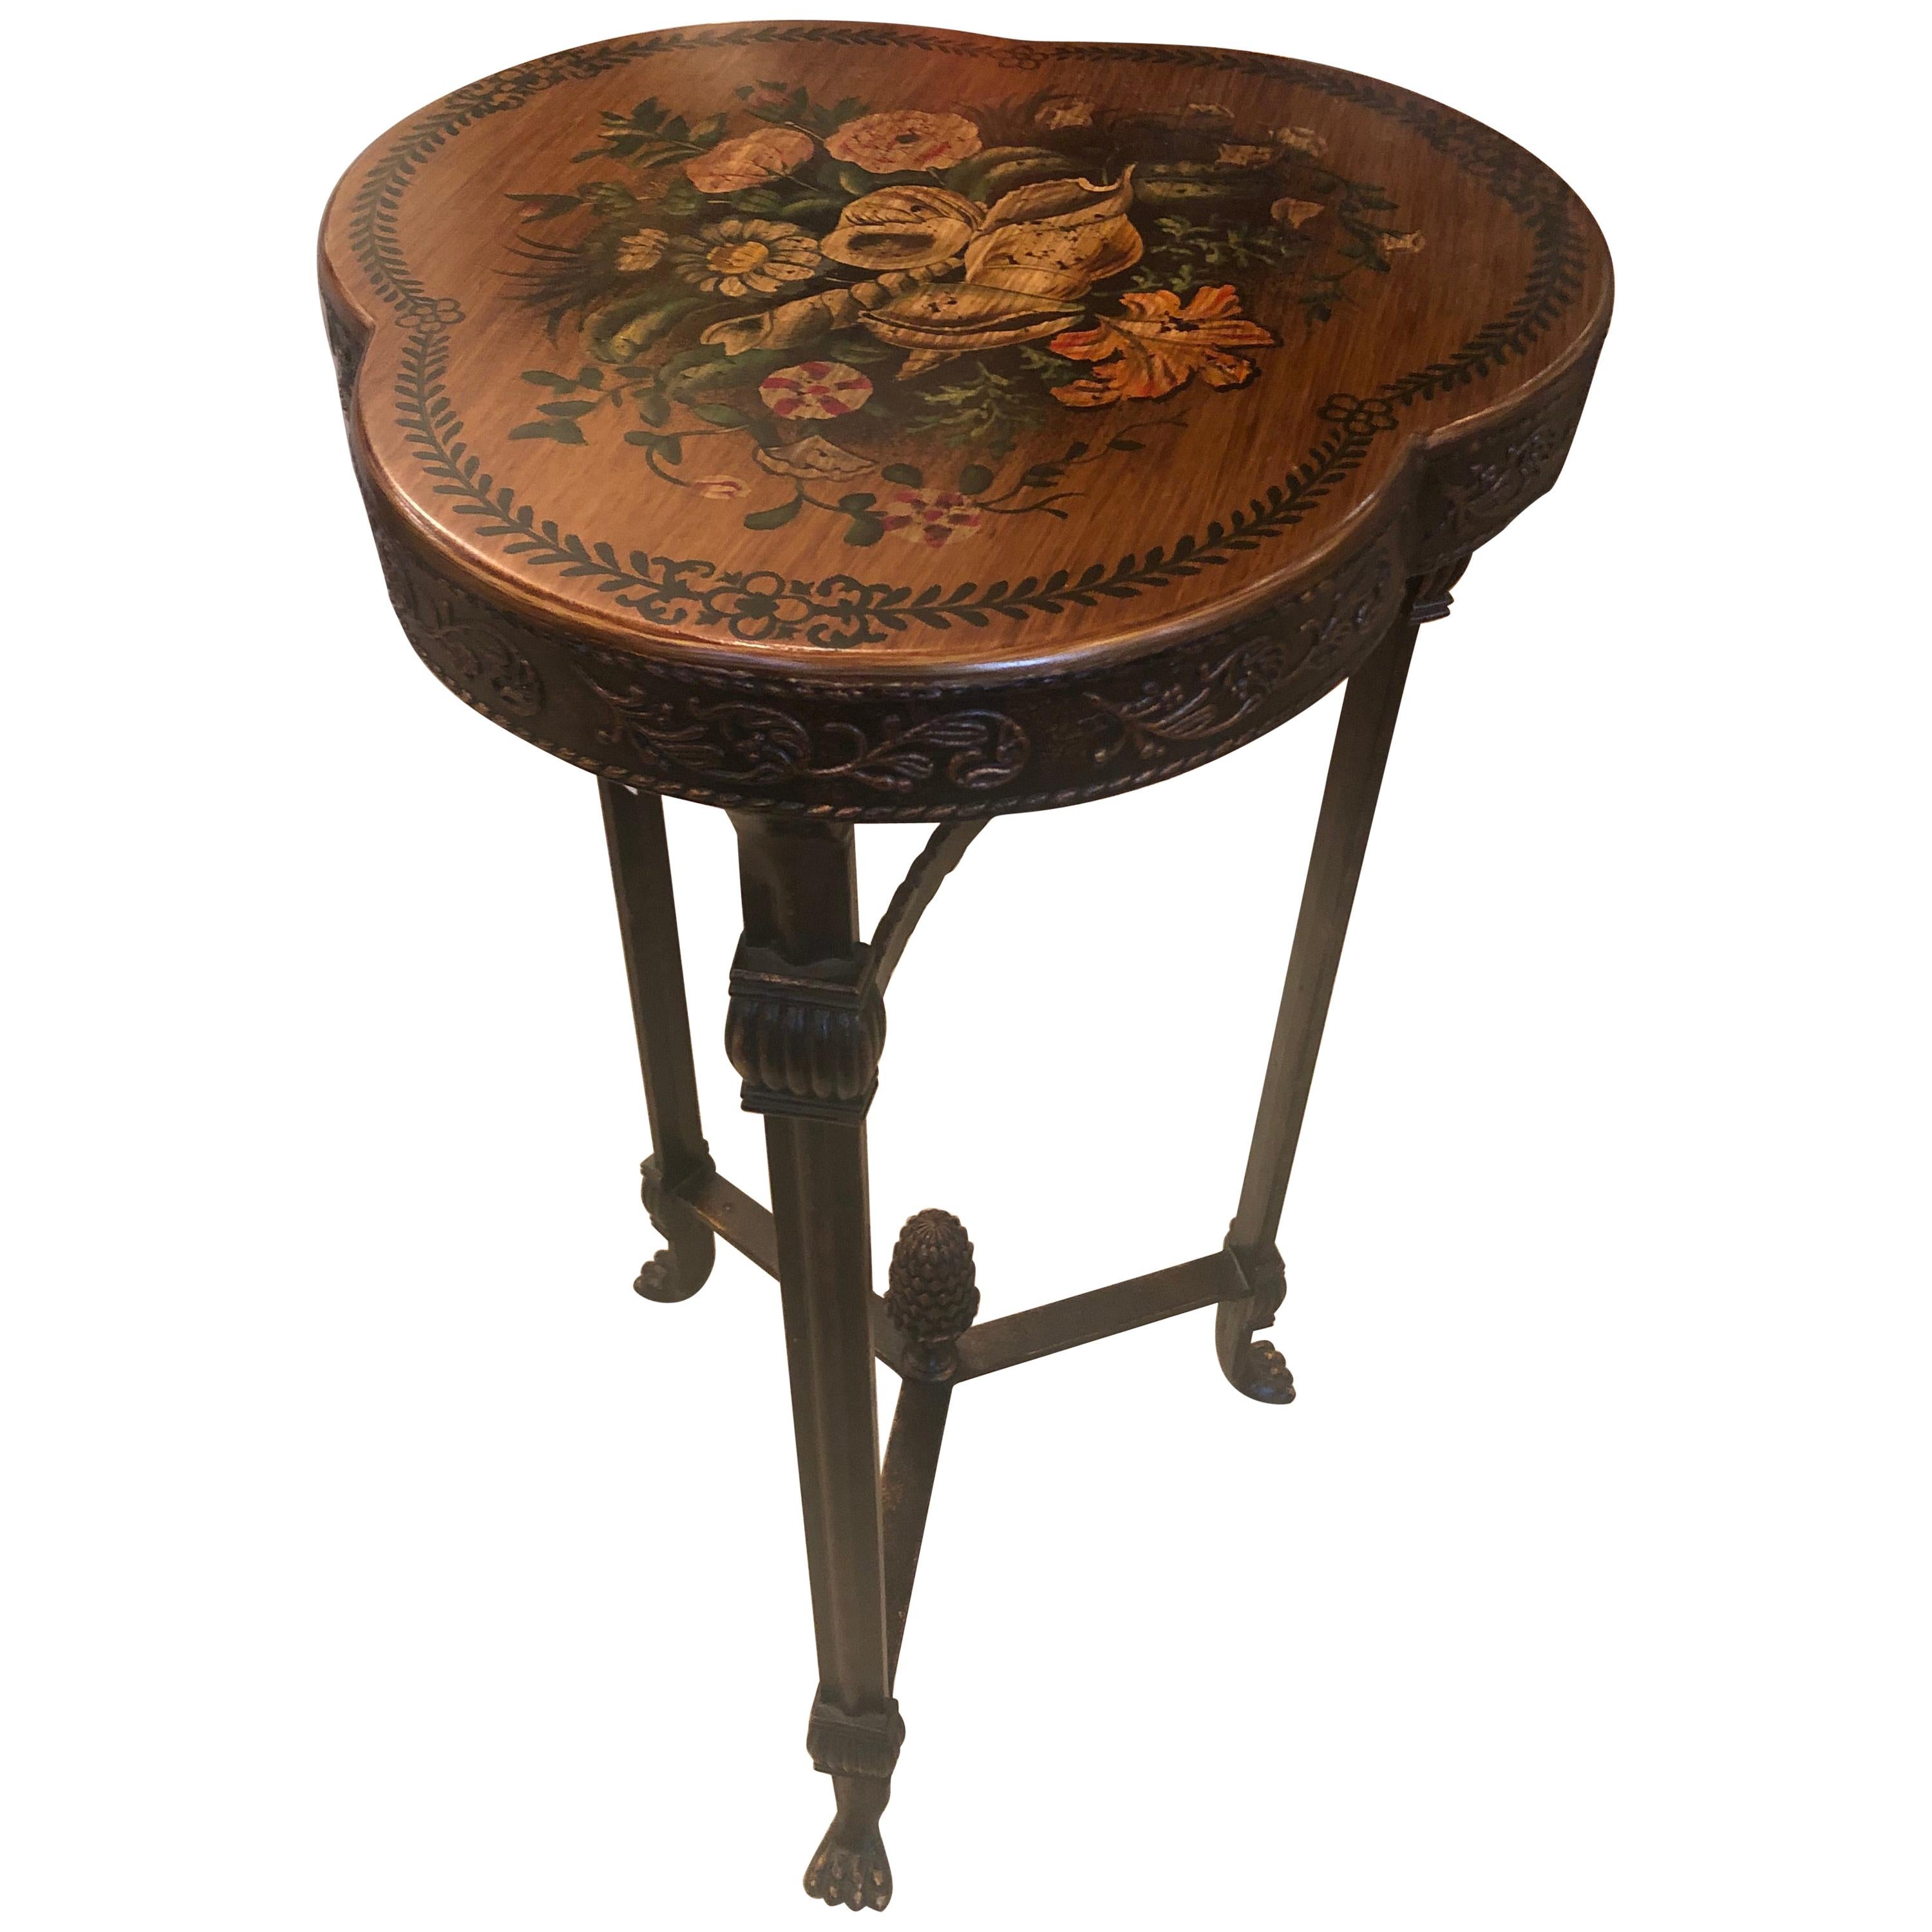 Theodore Alexander Shamrock Shaped End Table with Floral Decoration